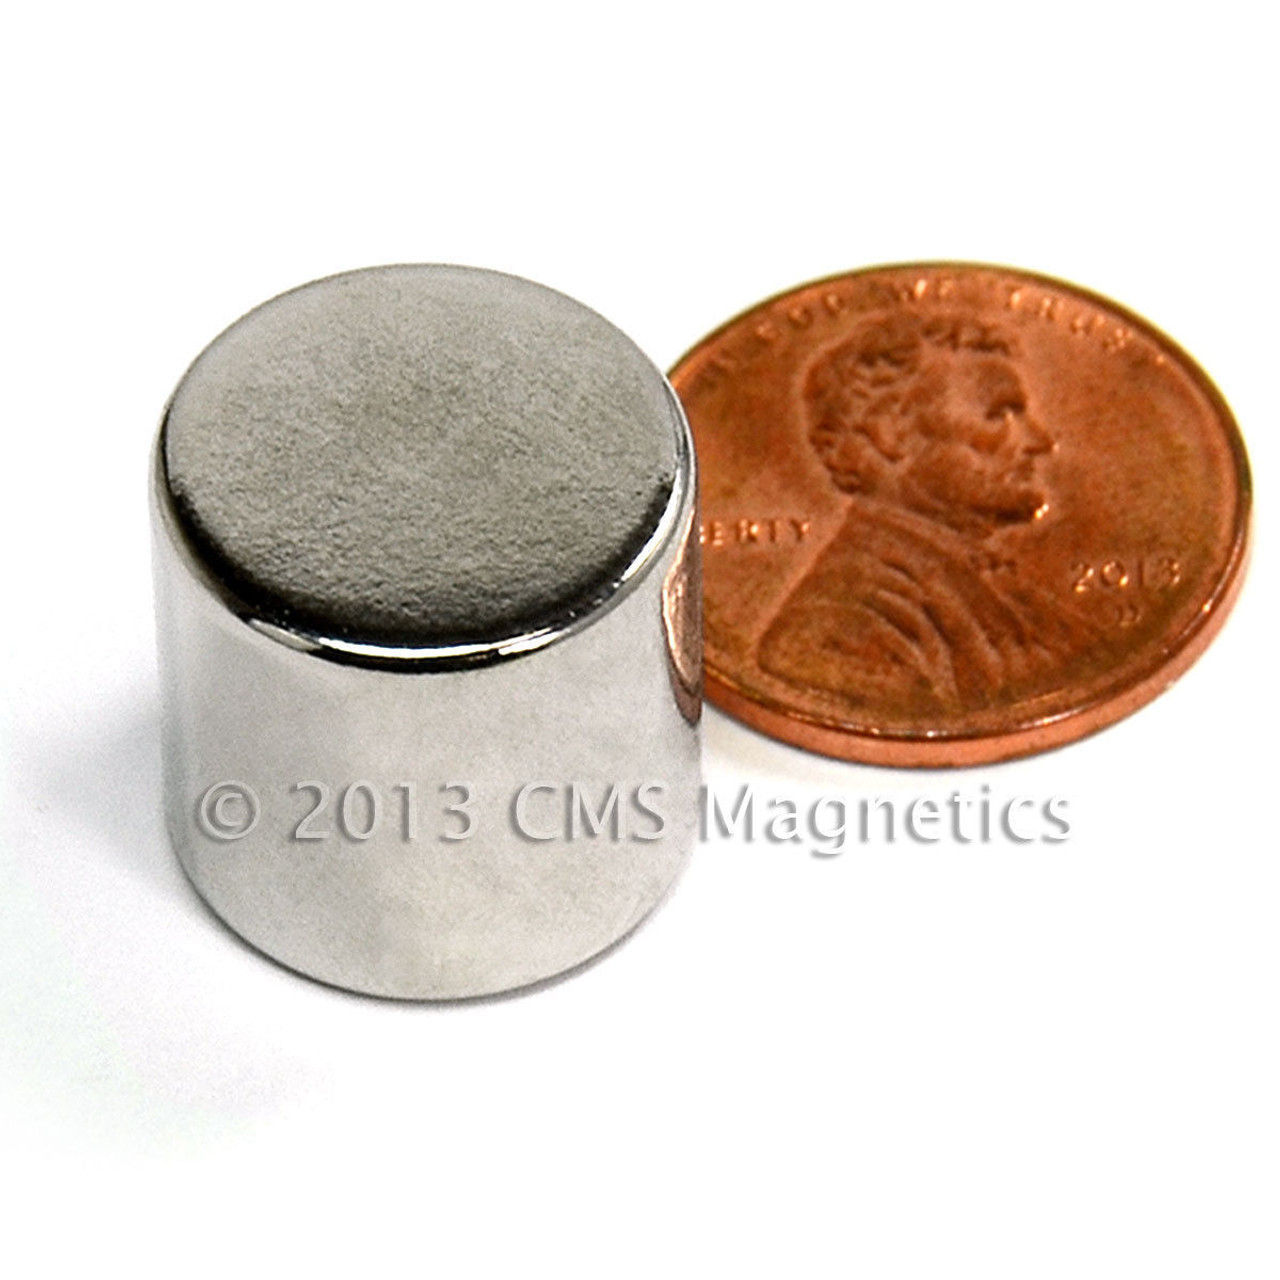 strong magnets for sale next to a penny except you can see the whole magnet super magnets